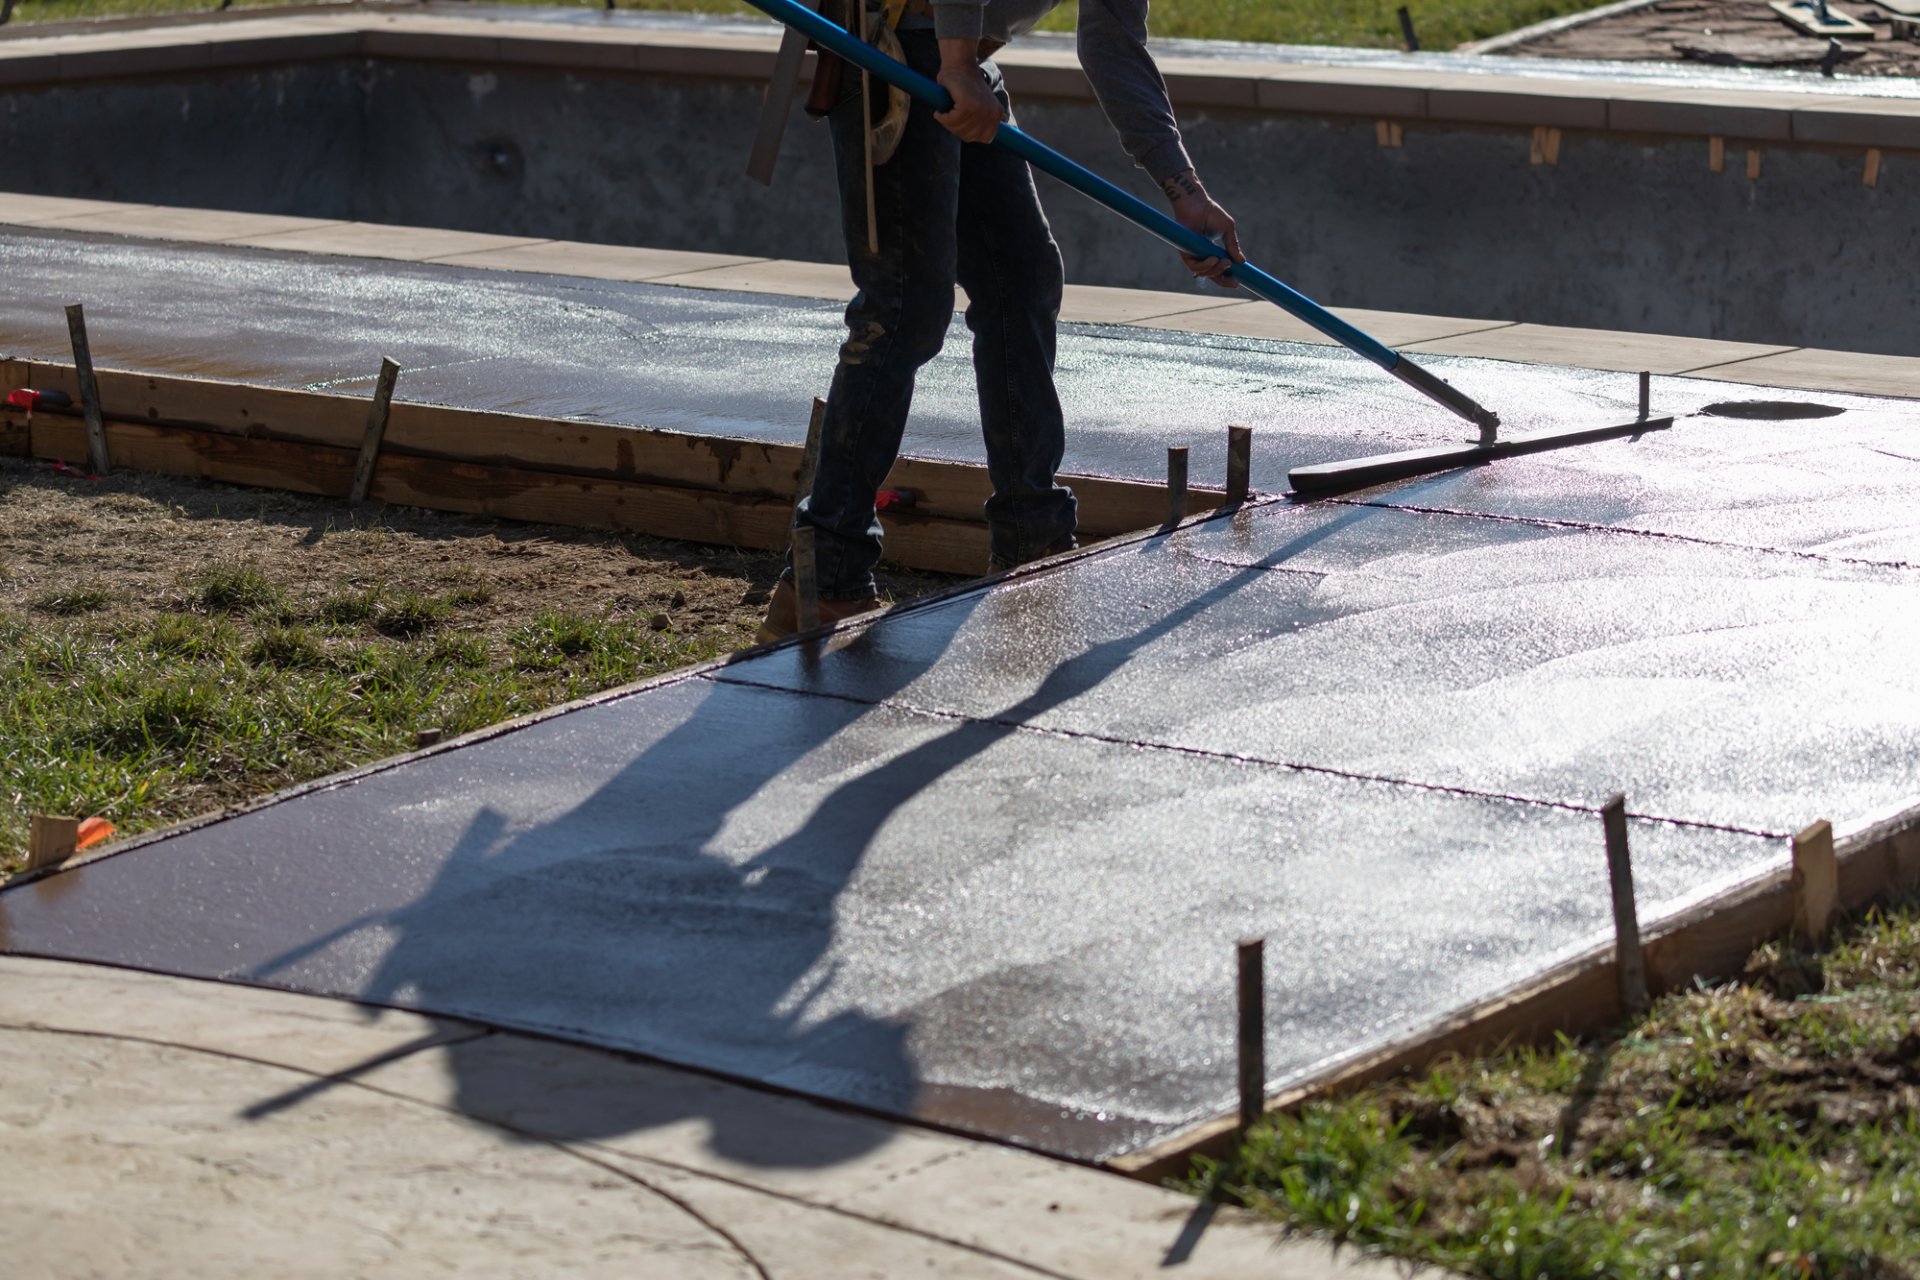 A construction worker smooths out wet, decorative concrete on a newly poured walkway next to an unfilled pool in Palm Beach County. The worker uses a long-handled tool and casts a pronounced shadow on the surface. Wooden forms and metal stakes outline the stamped concrete path.